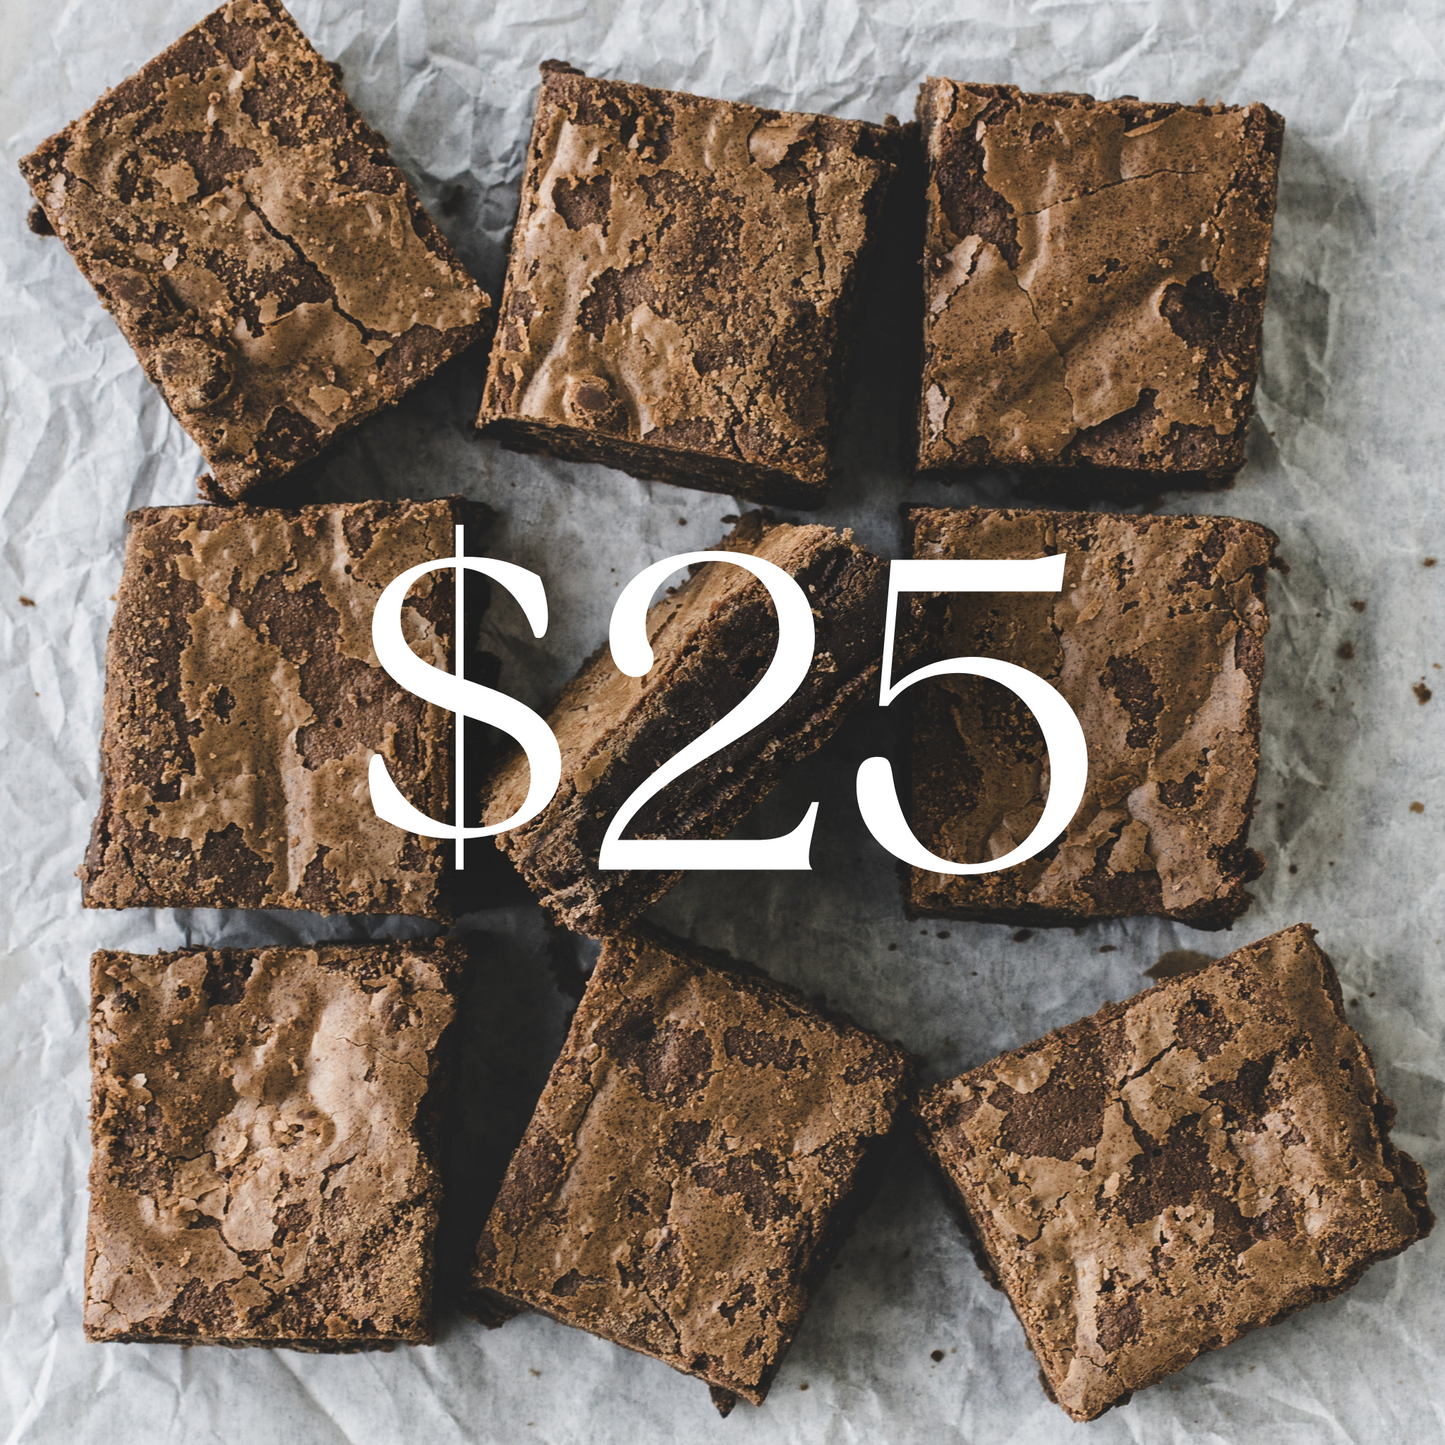 Blissful Brownies Gift Card